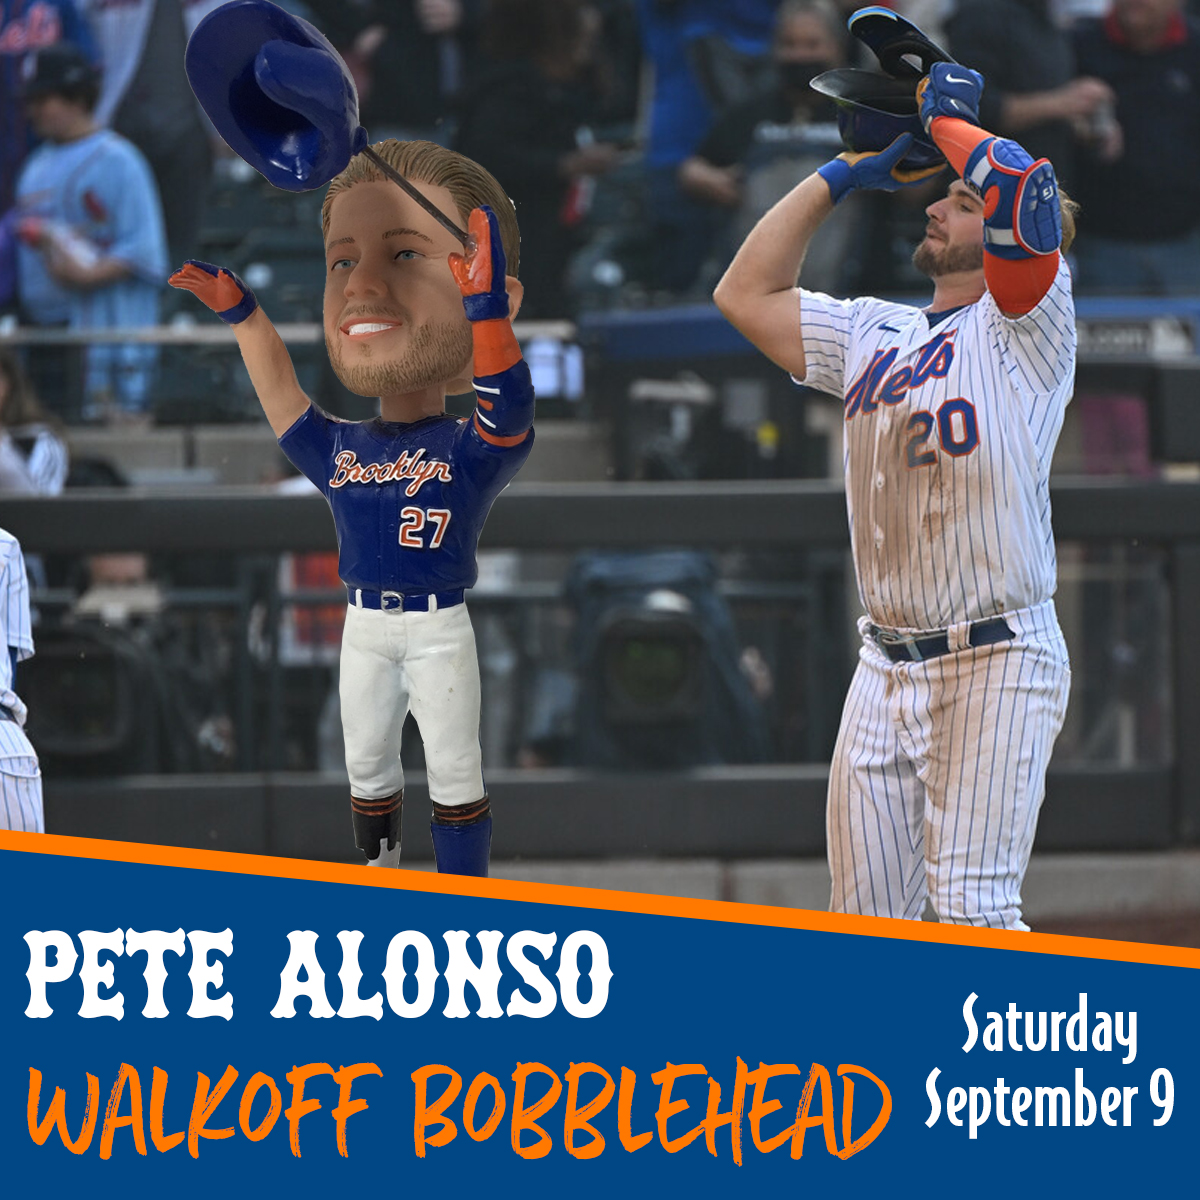 We're celebrating 10 days 'til ⚾️pening Day by giving 10 Pete Alonso Polar  Bear Bobbleheads away! ❄️🐻 To enter, just follow us and like…